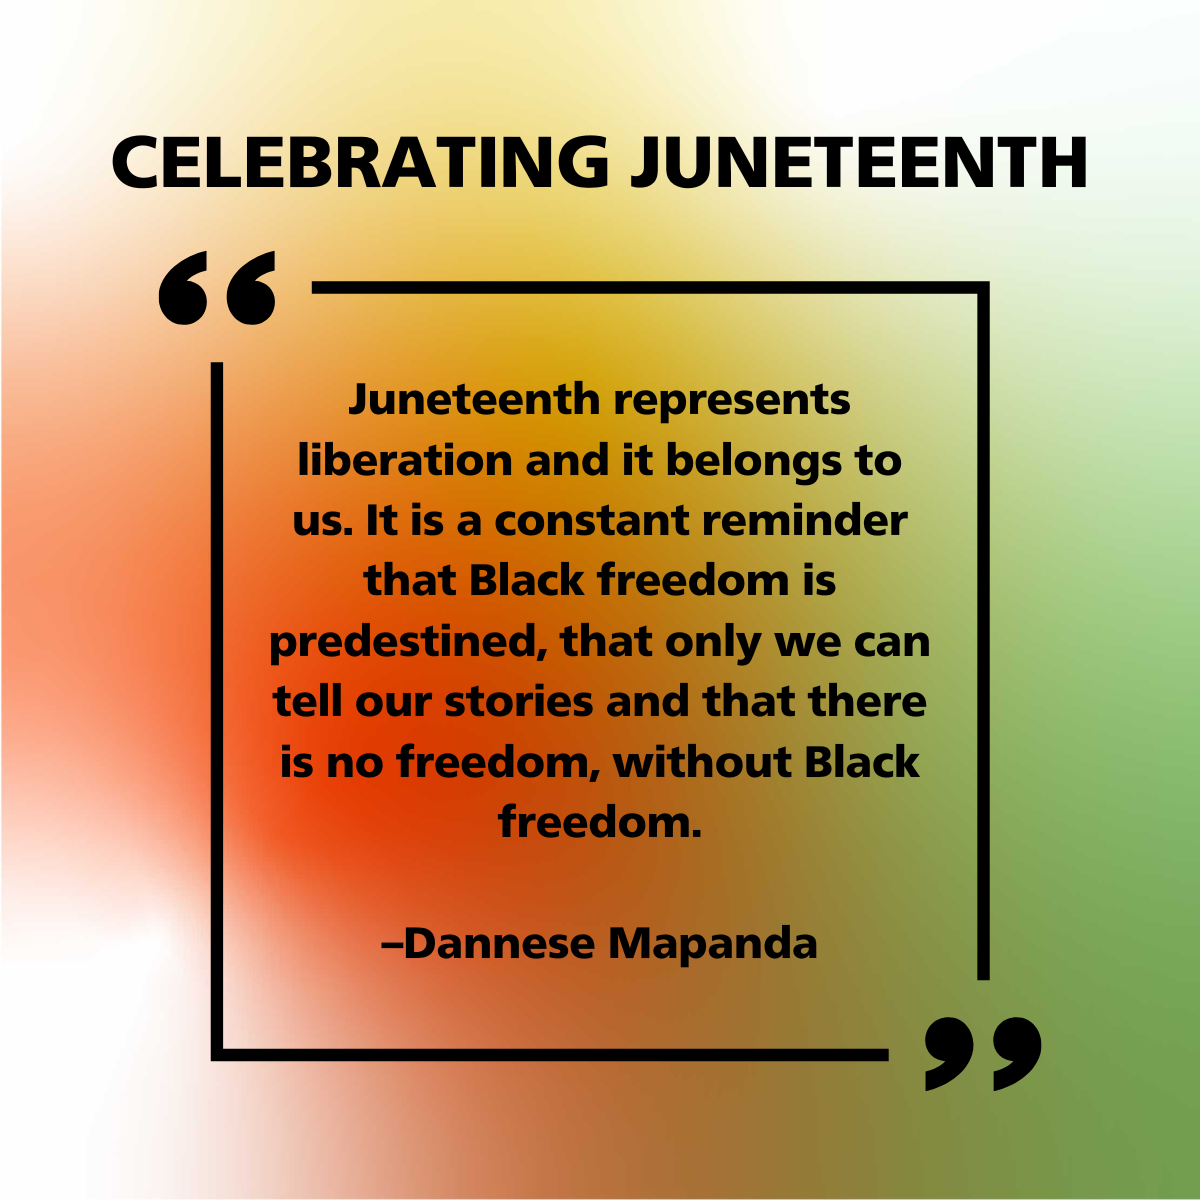 Happy Juneteenth! - California Partnership to End Domestic Violence